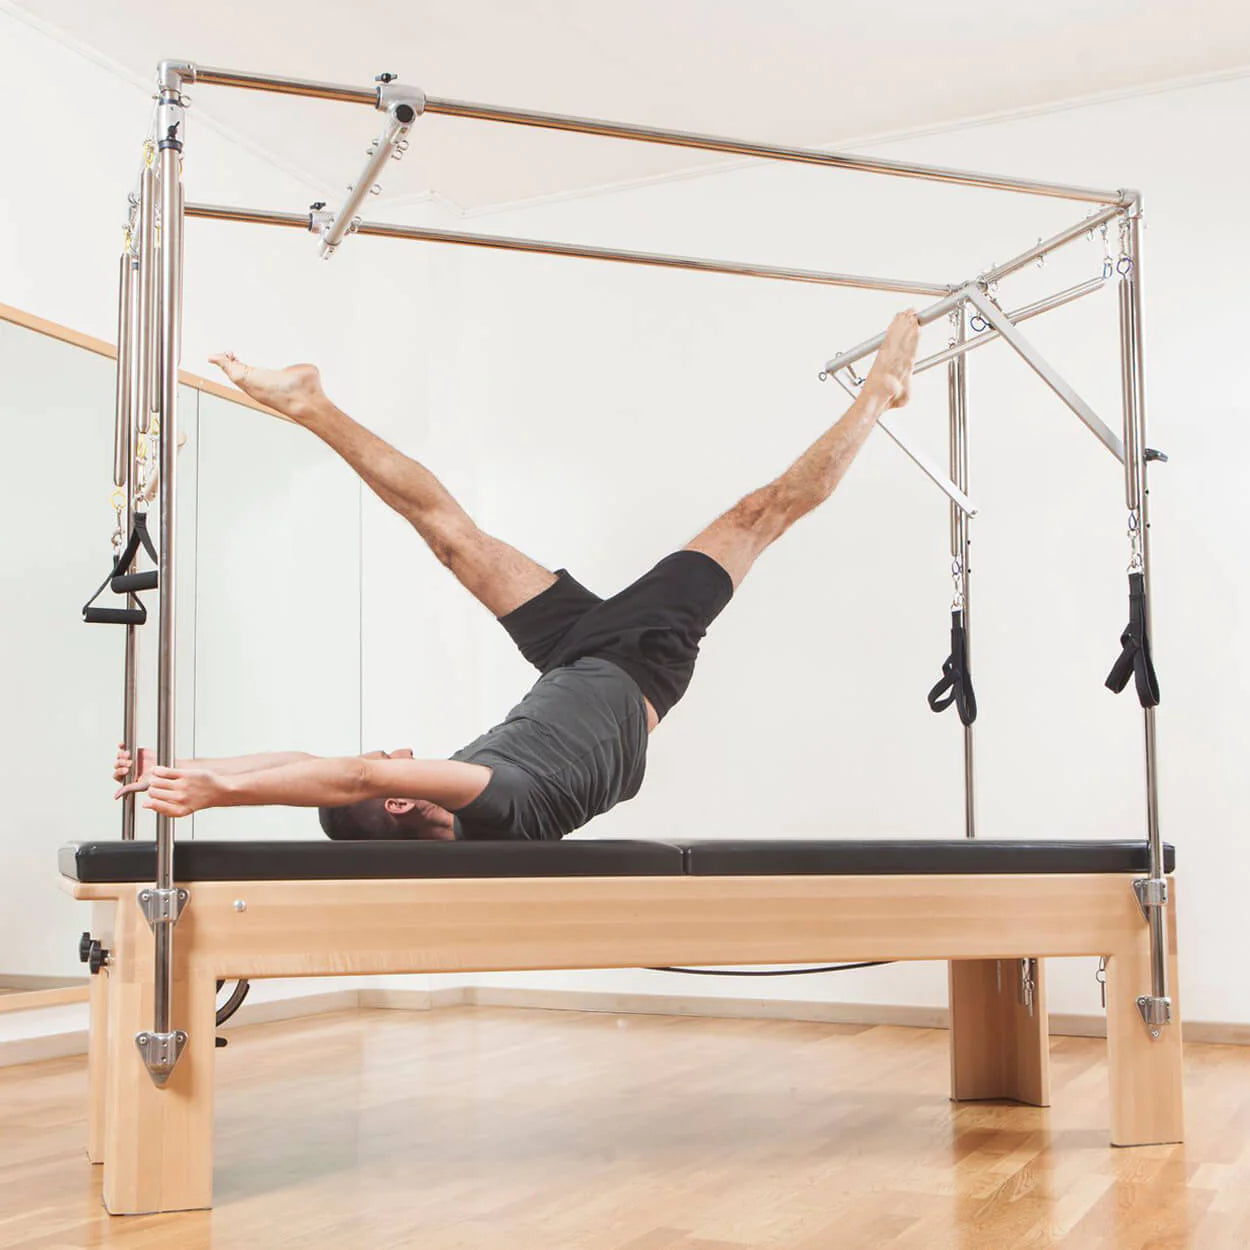 Pilates Cadillac vs. Reformer: What's the Difference?